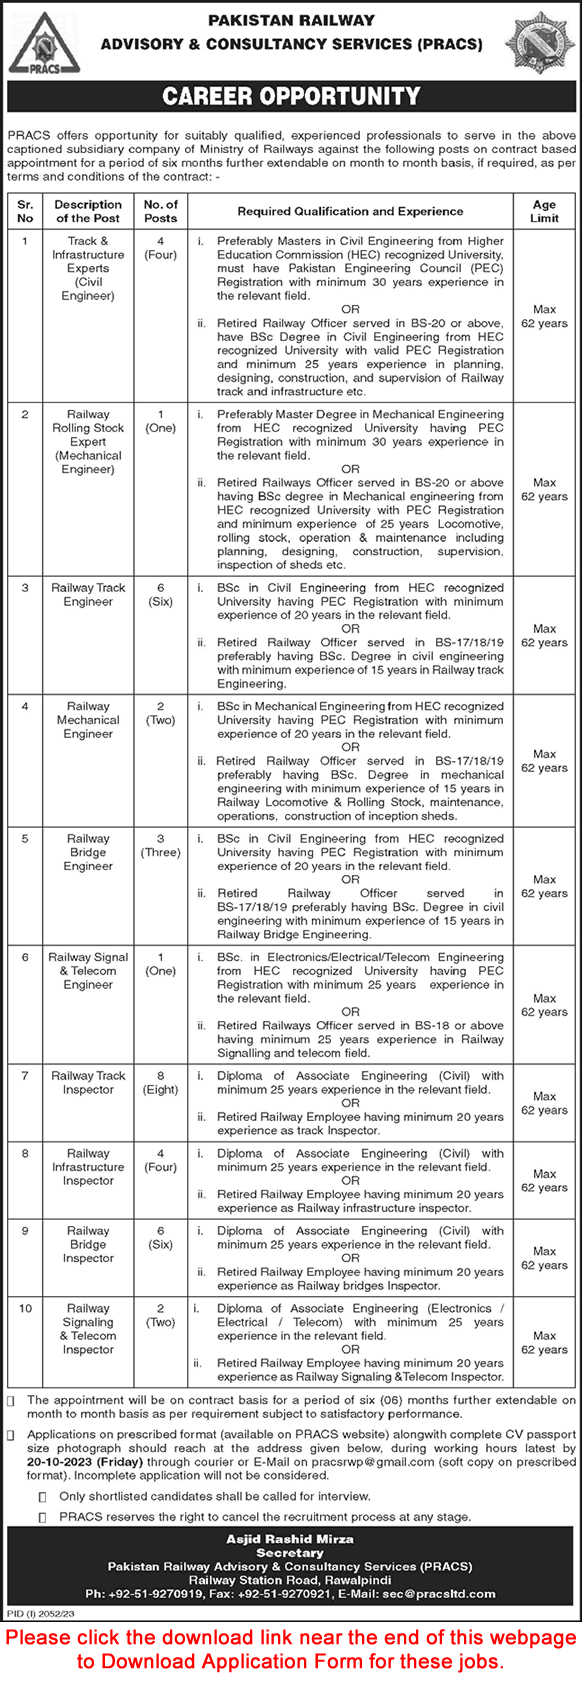 Pakistan Railway Advisory and Consultancy Services Jobs October 2023 PRACS Application Form Latest